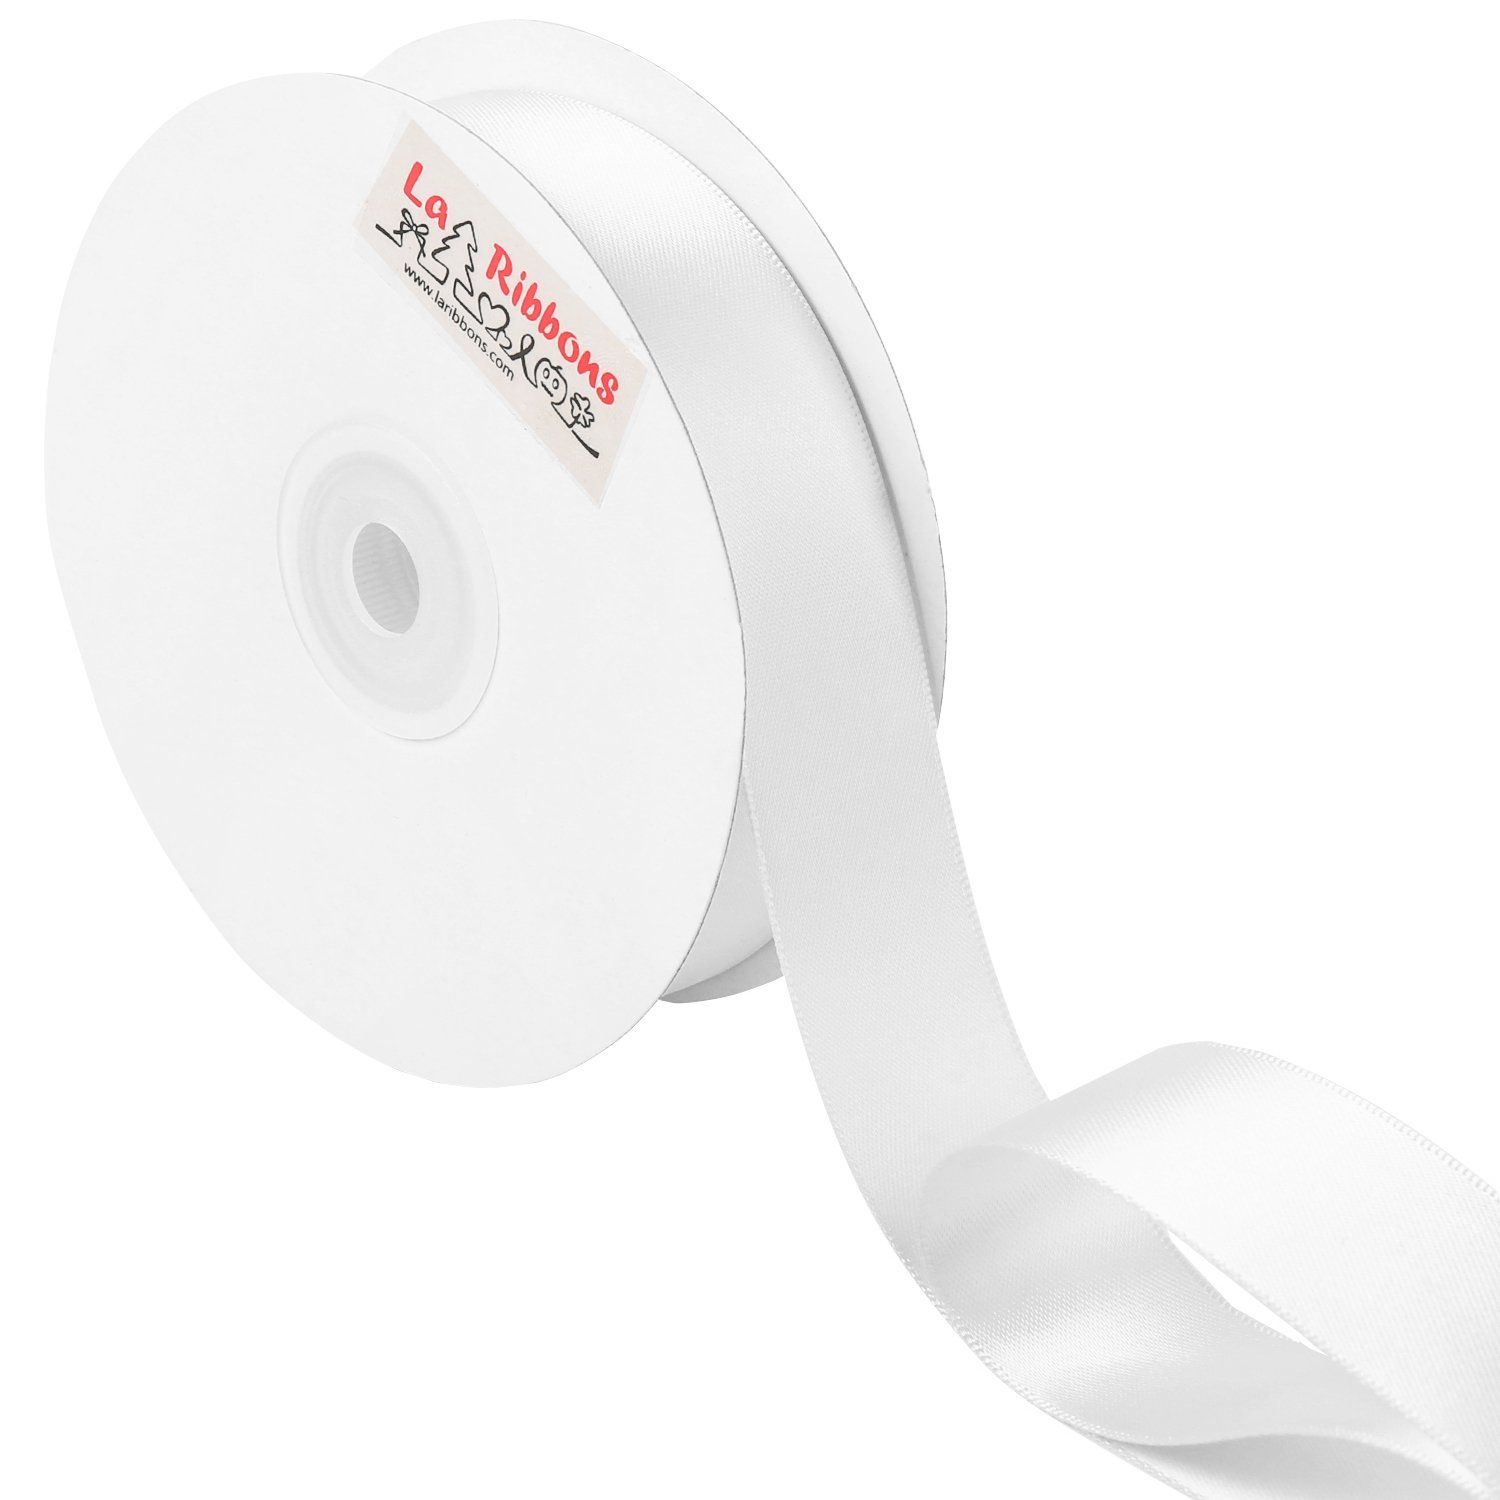 LaRibbons 1 Inch Wide Double Face Satin Ribbon - 25 Yard (029-White)  029-White 1 inch x 25 Yards